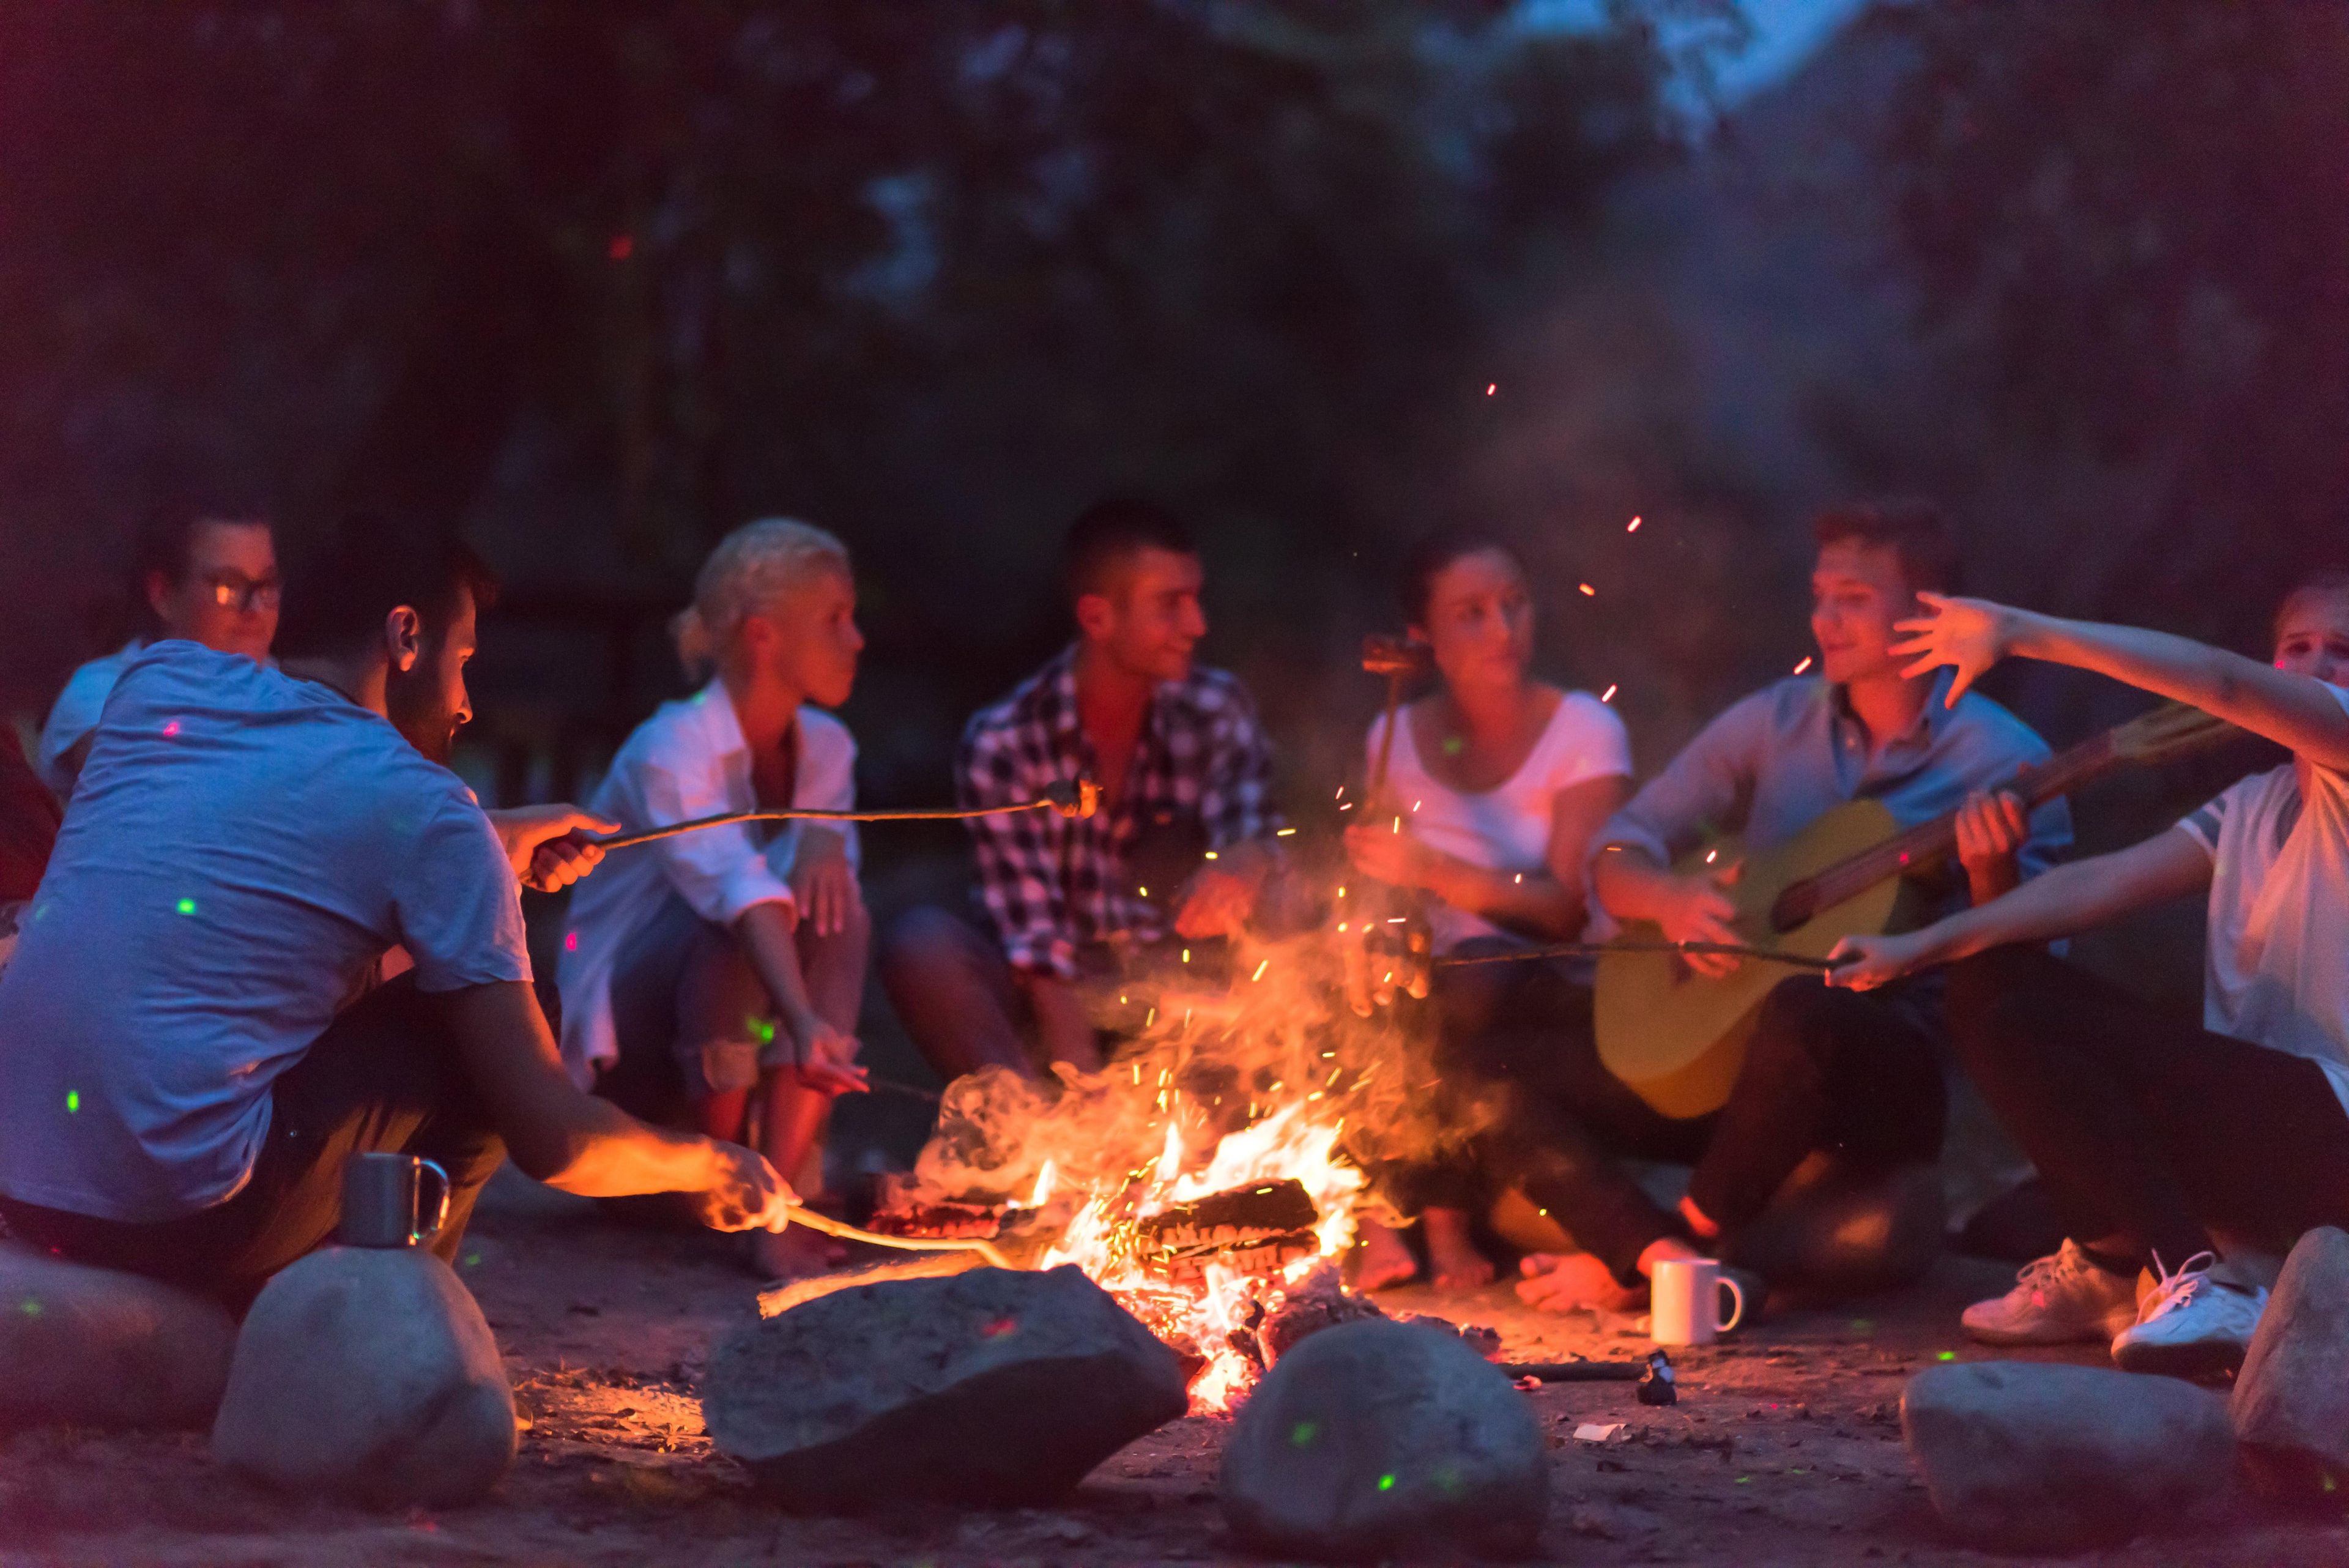 A group of young people sit around a campfire, grilling marshmallows and listening to guitar music.